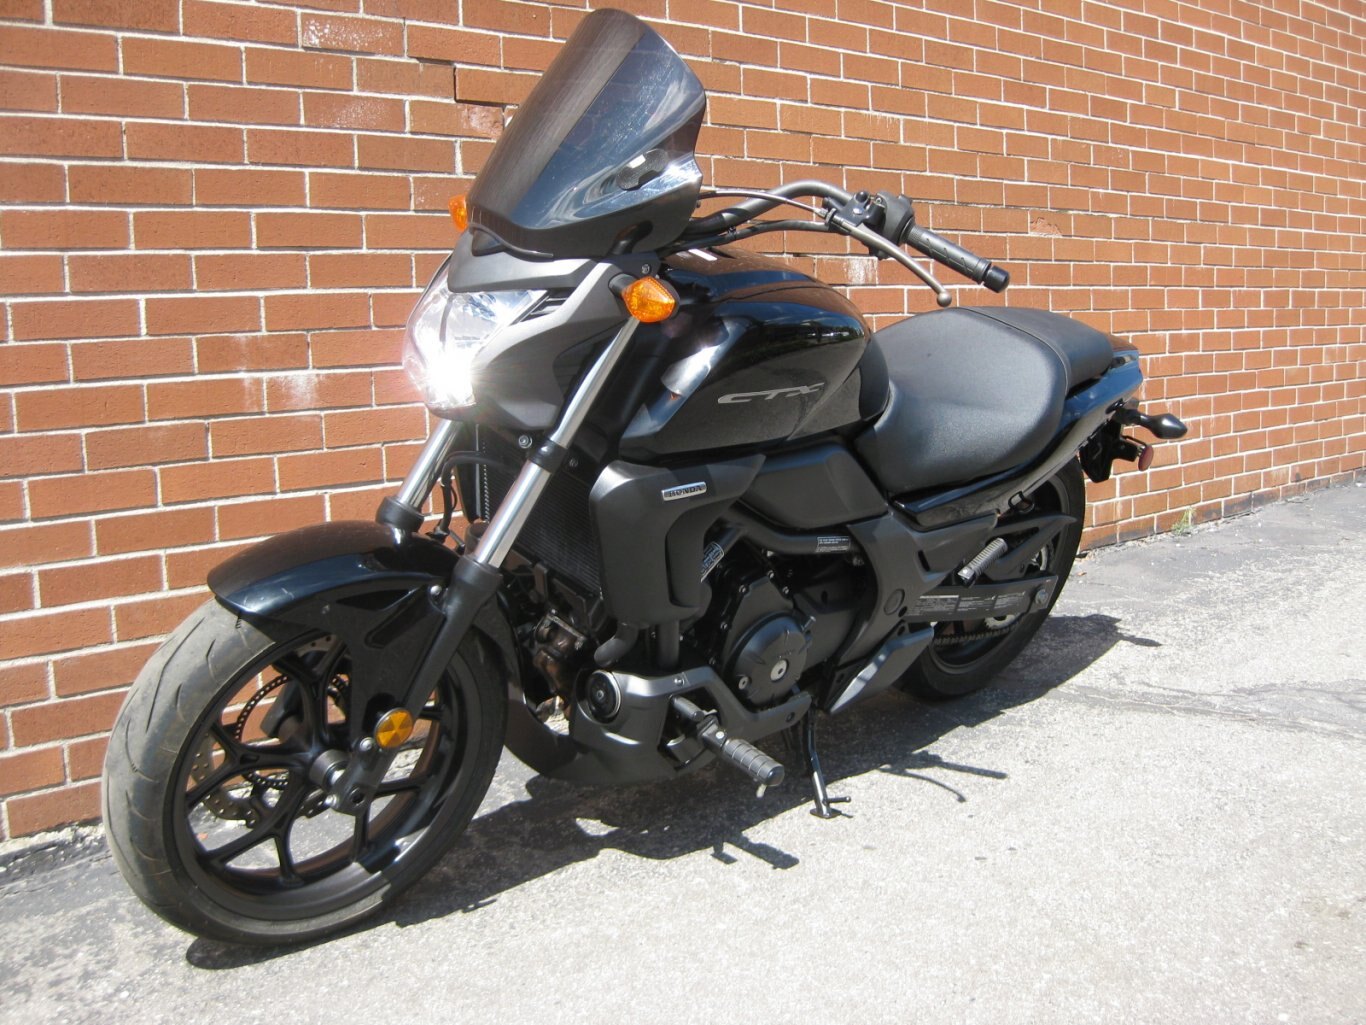 2014 Honda CTX700N SOLD CONGRATULATIONS TO SIR JAMES – A FELLOW “ROAD WARRIOR” !! WELCOME TO THE DARKSIDE & THE COMMUNITY OF MOTORCYCLING ON YOUR DARK HORSE A TWO WHEEL FREEDOM MACHINE” WITH THANKS FROM GARY & TEAM CYCLE WORLD!!!!